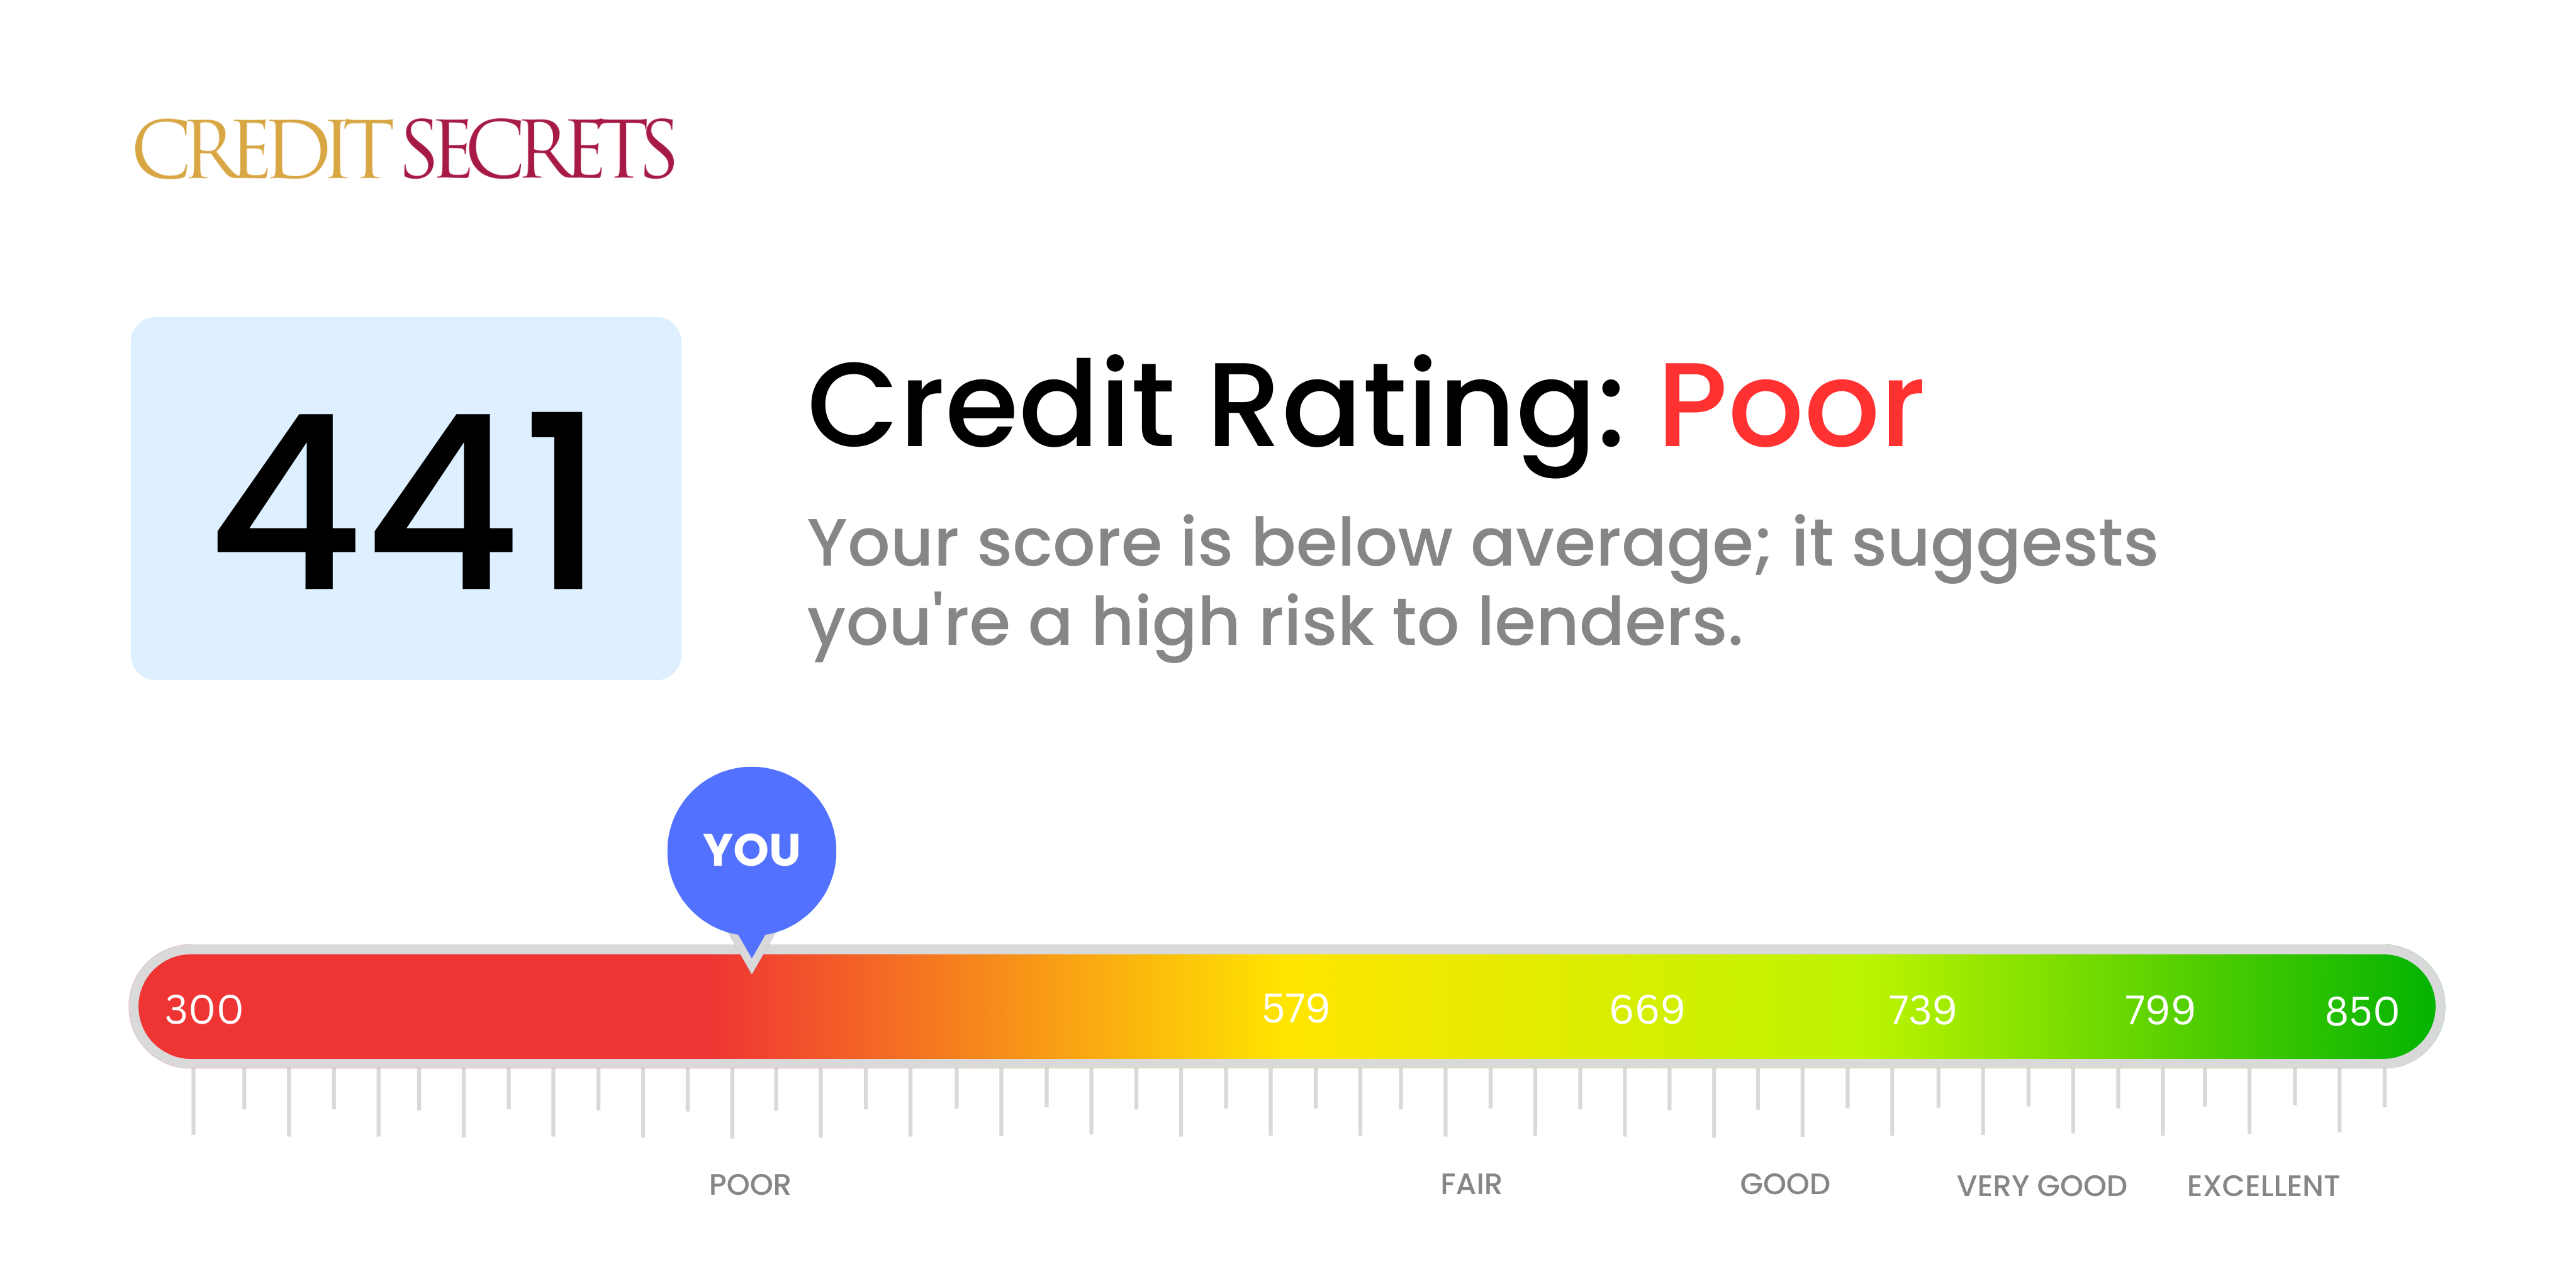 Is 441 a good credit score?